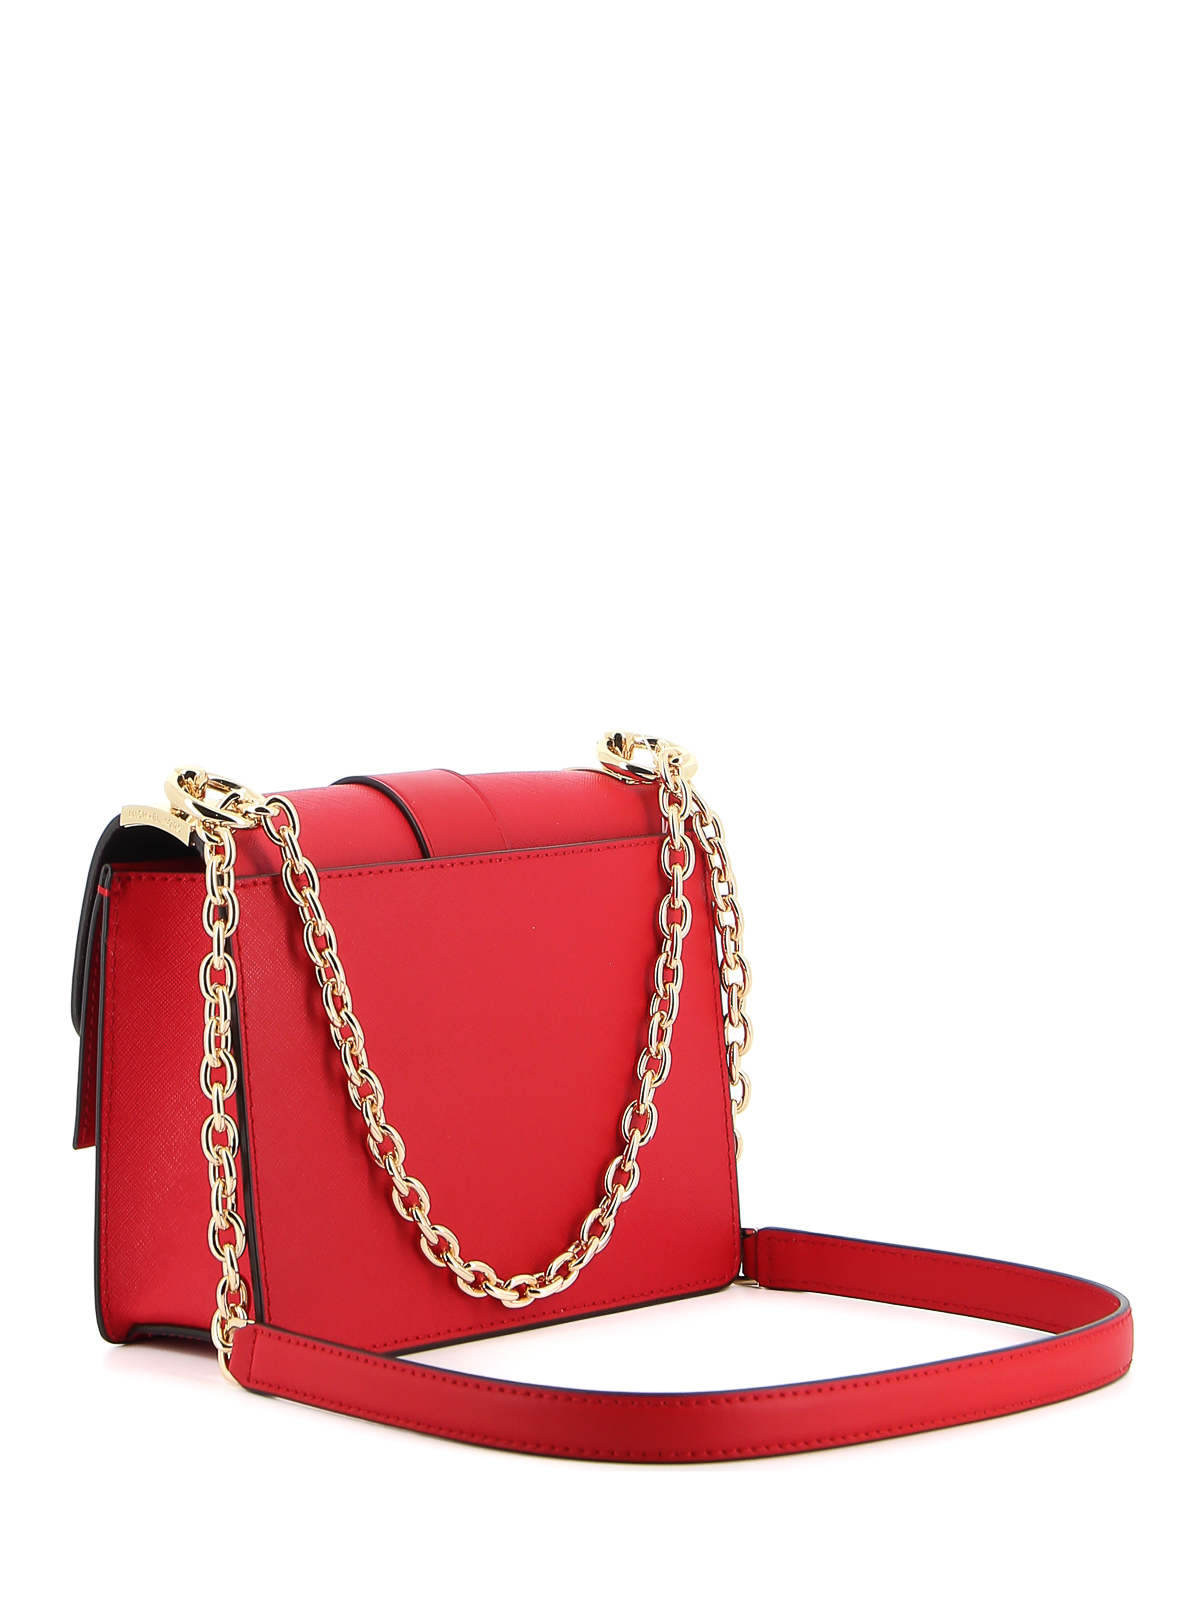 MICHAEL KORS: Greenwich Michael bag in saffiano leather - Red